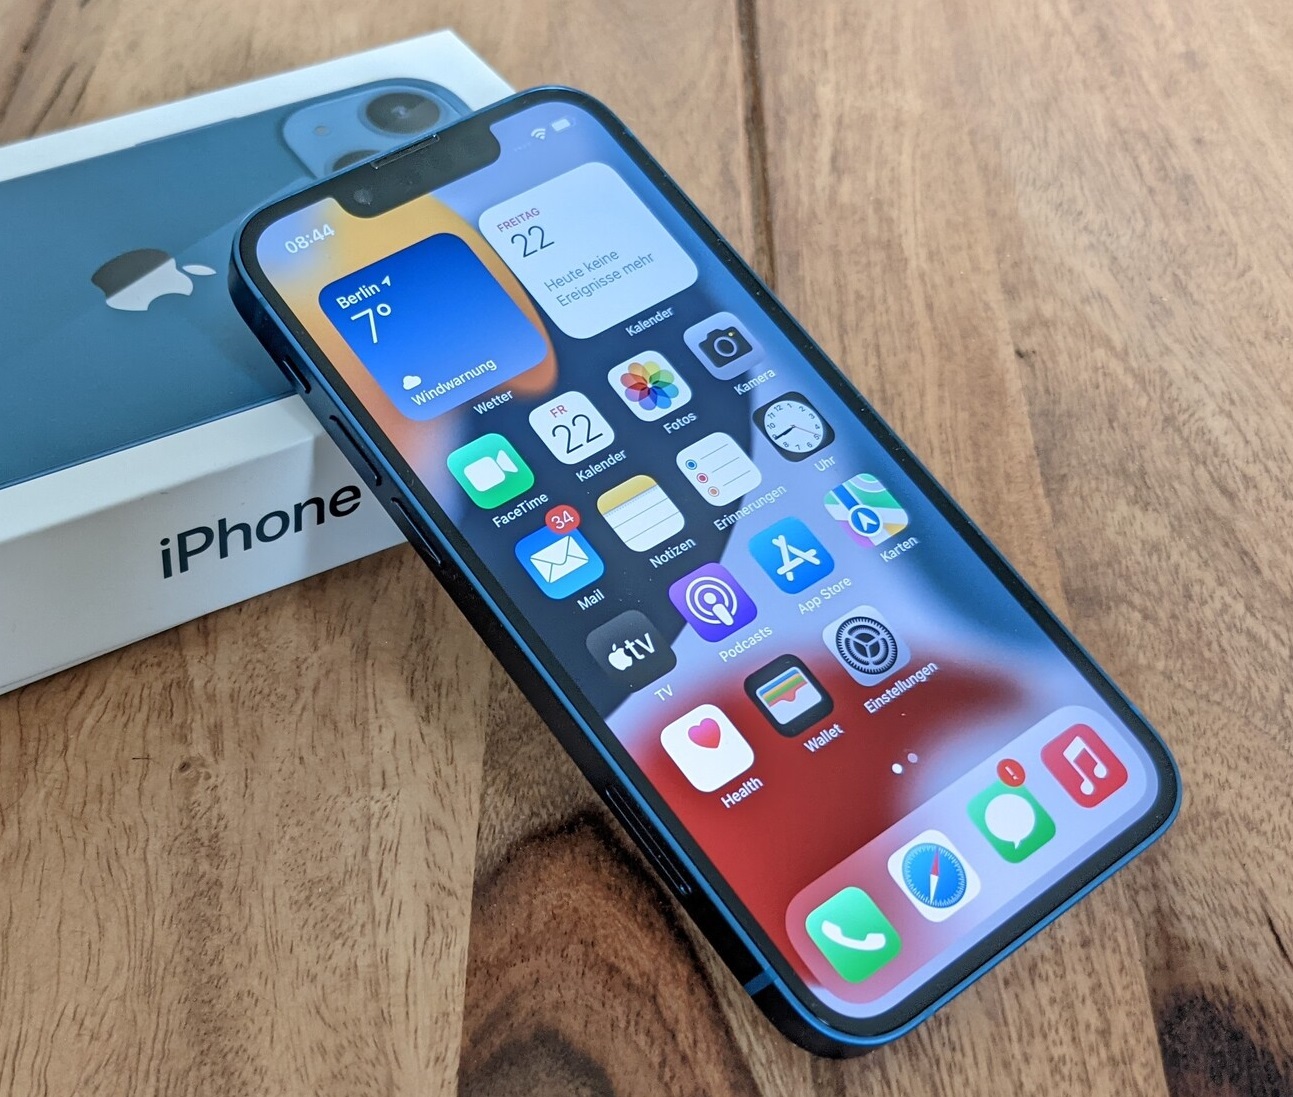 Purported iPhone 14 Pro and iPhone 14 Pro Max price hikes to raise Apple's  average selling price to envy-inducing new heights -  News